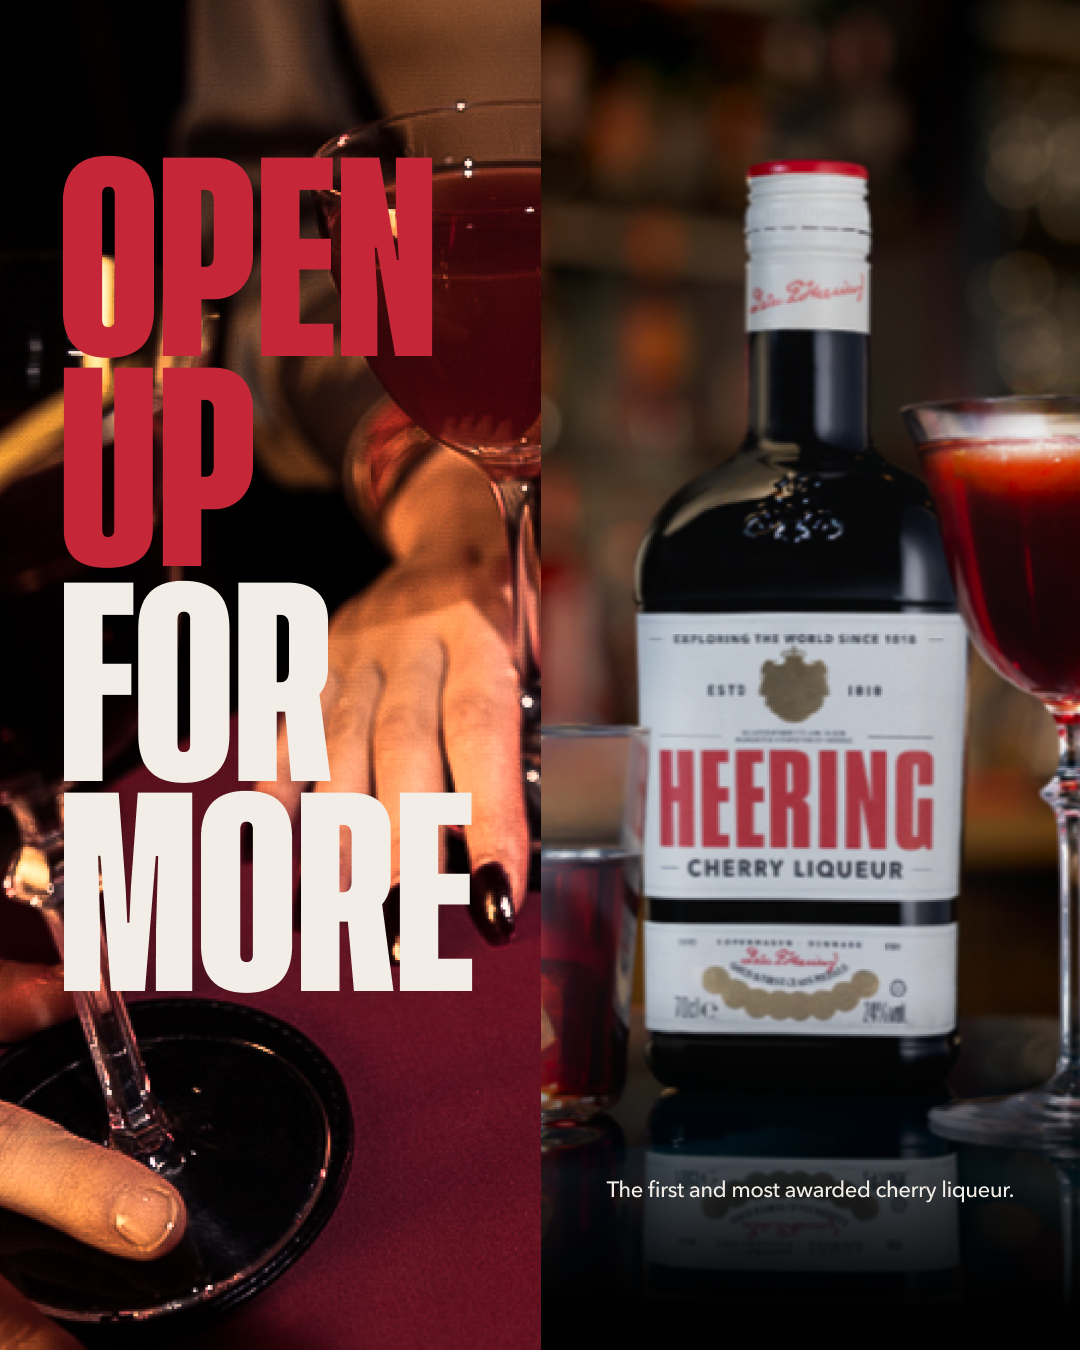 Picture that includes two visuals split in half - one half is "Open up for more" and one is Heering bottle